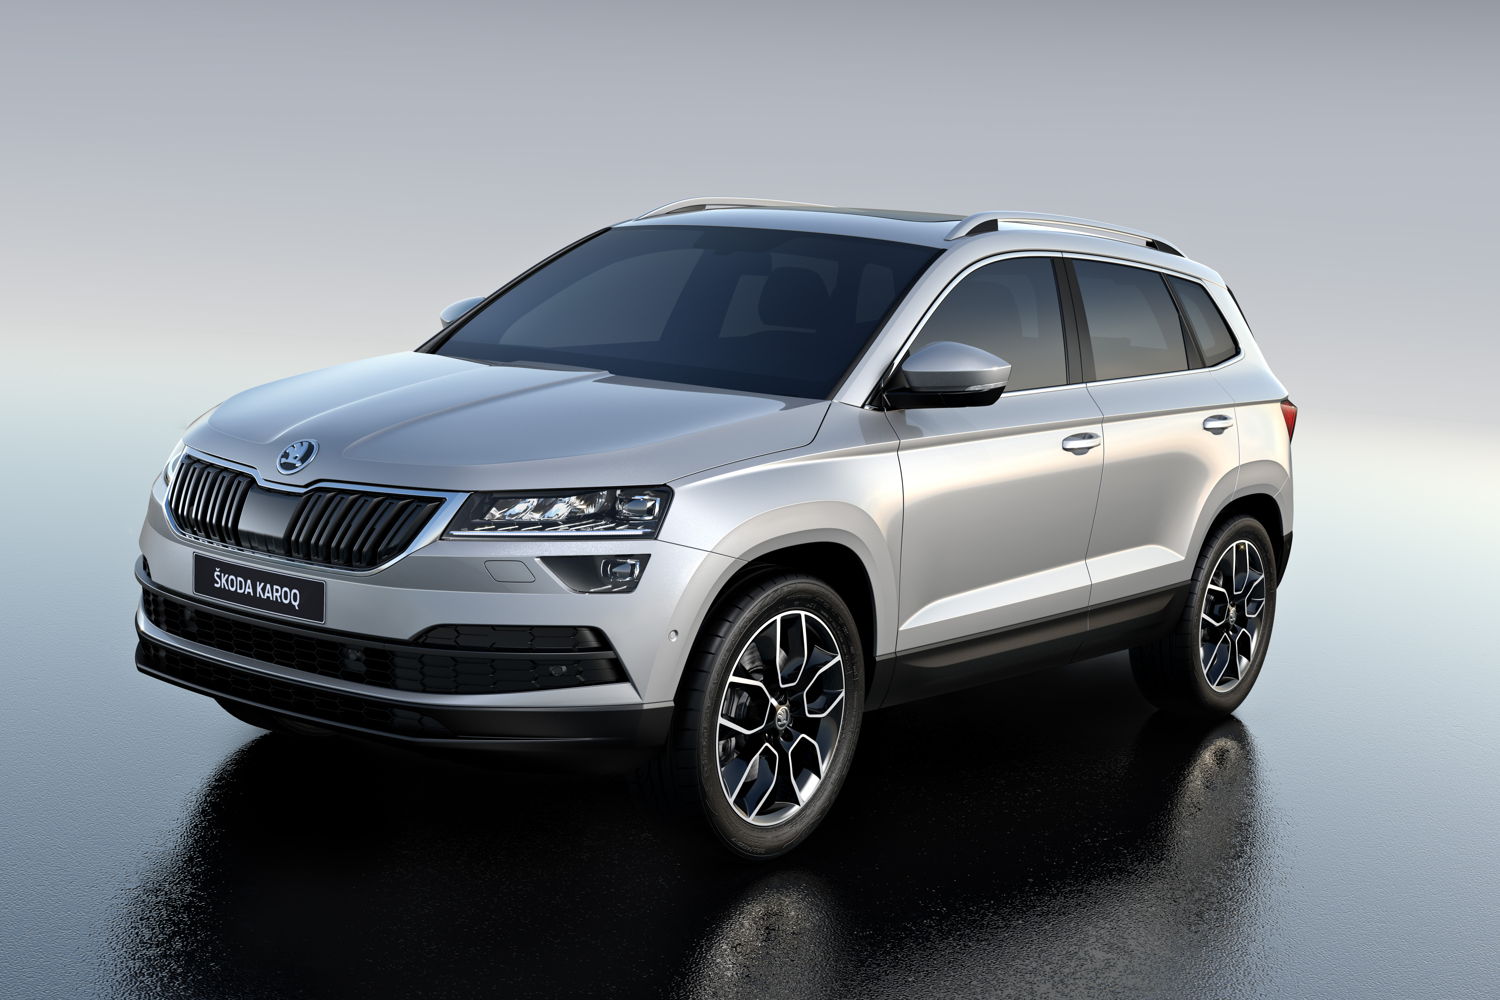 The readers of the German trade magazine 'auto motor und sport' have voted the new ŠKODA KAROQ as the best new design of in the category of compact SUV’s. The traditional Czech brand’s compact SUV prevailed against 17 competitors to win the converted ‘Autonis’ award.